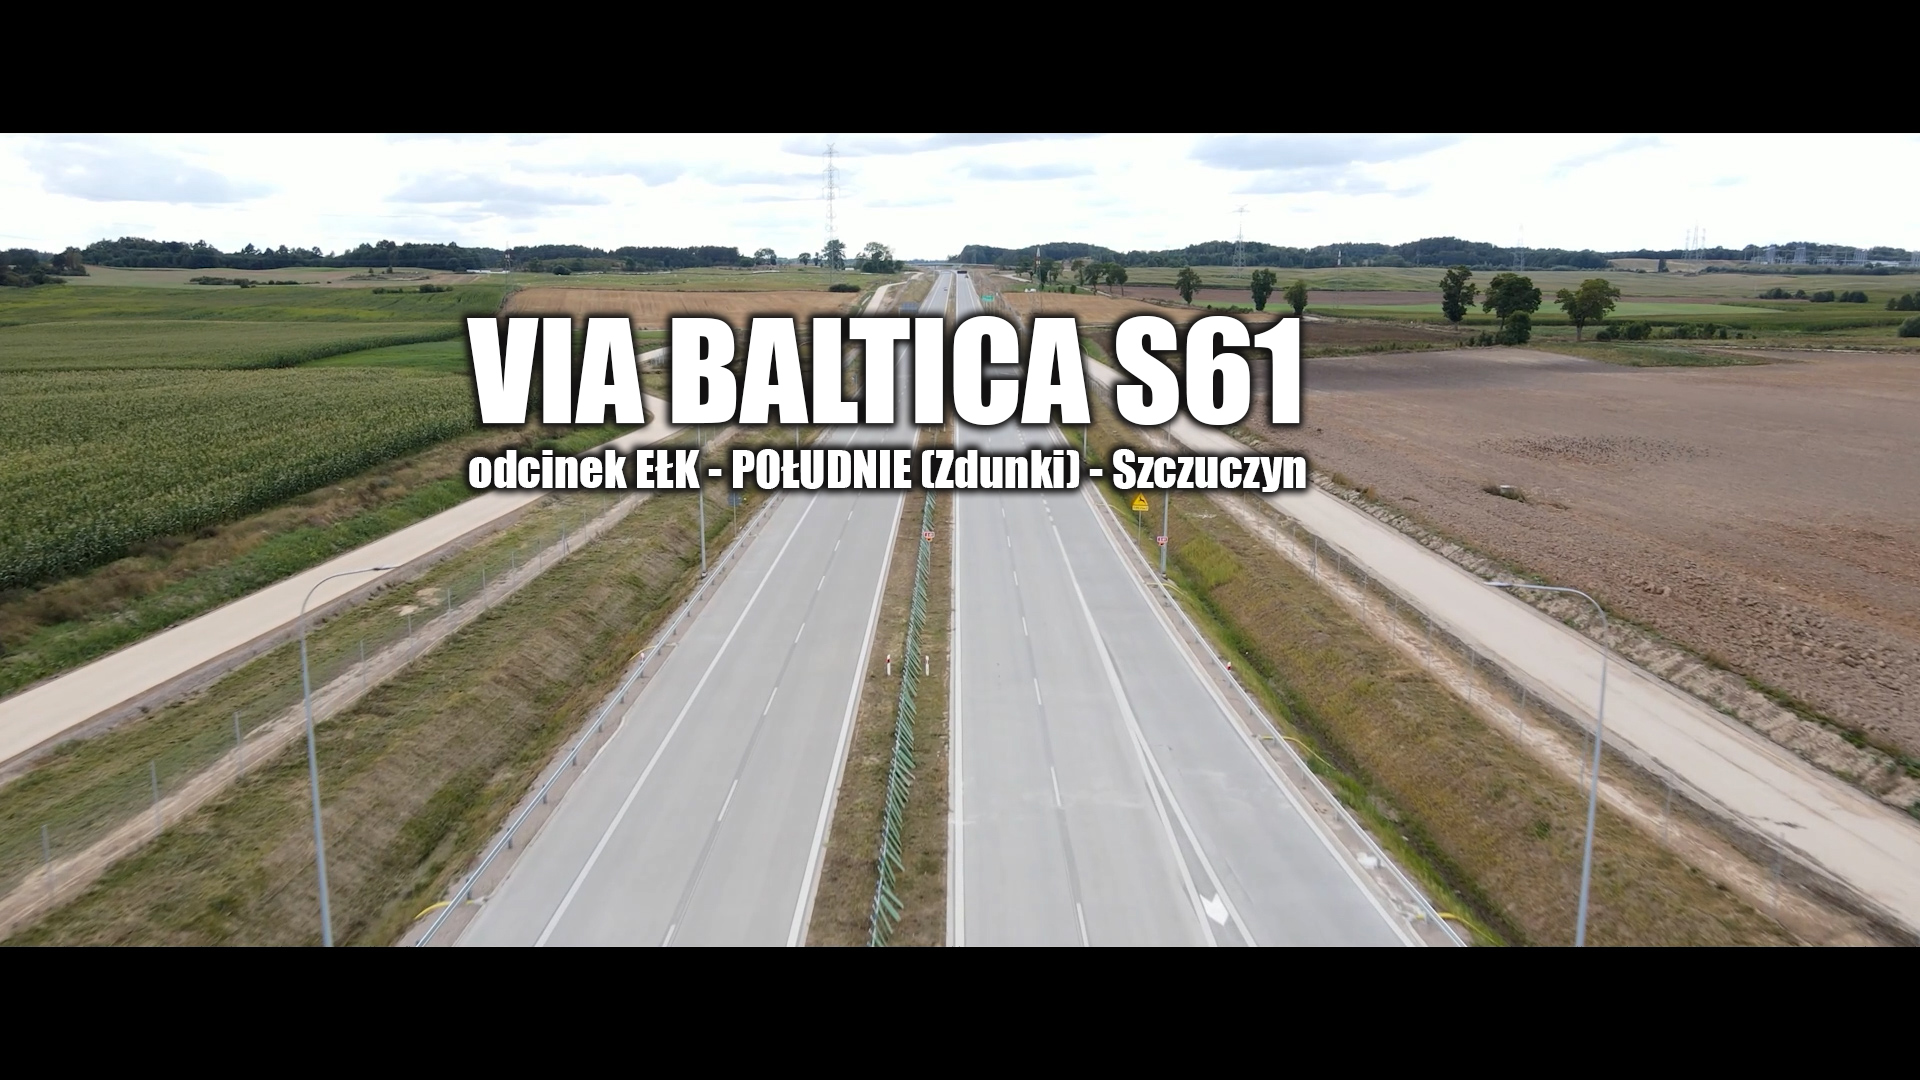 Official opening of the next stage of via Baltica – watch the video